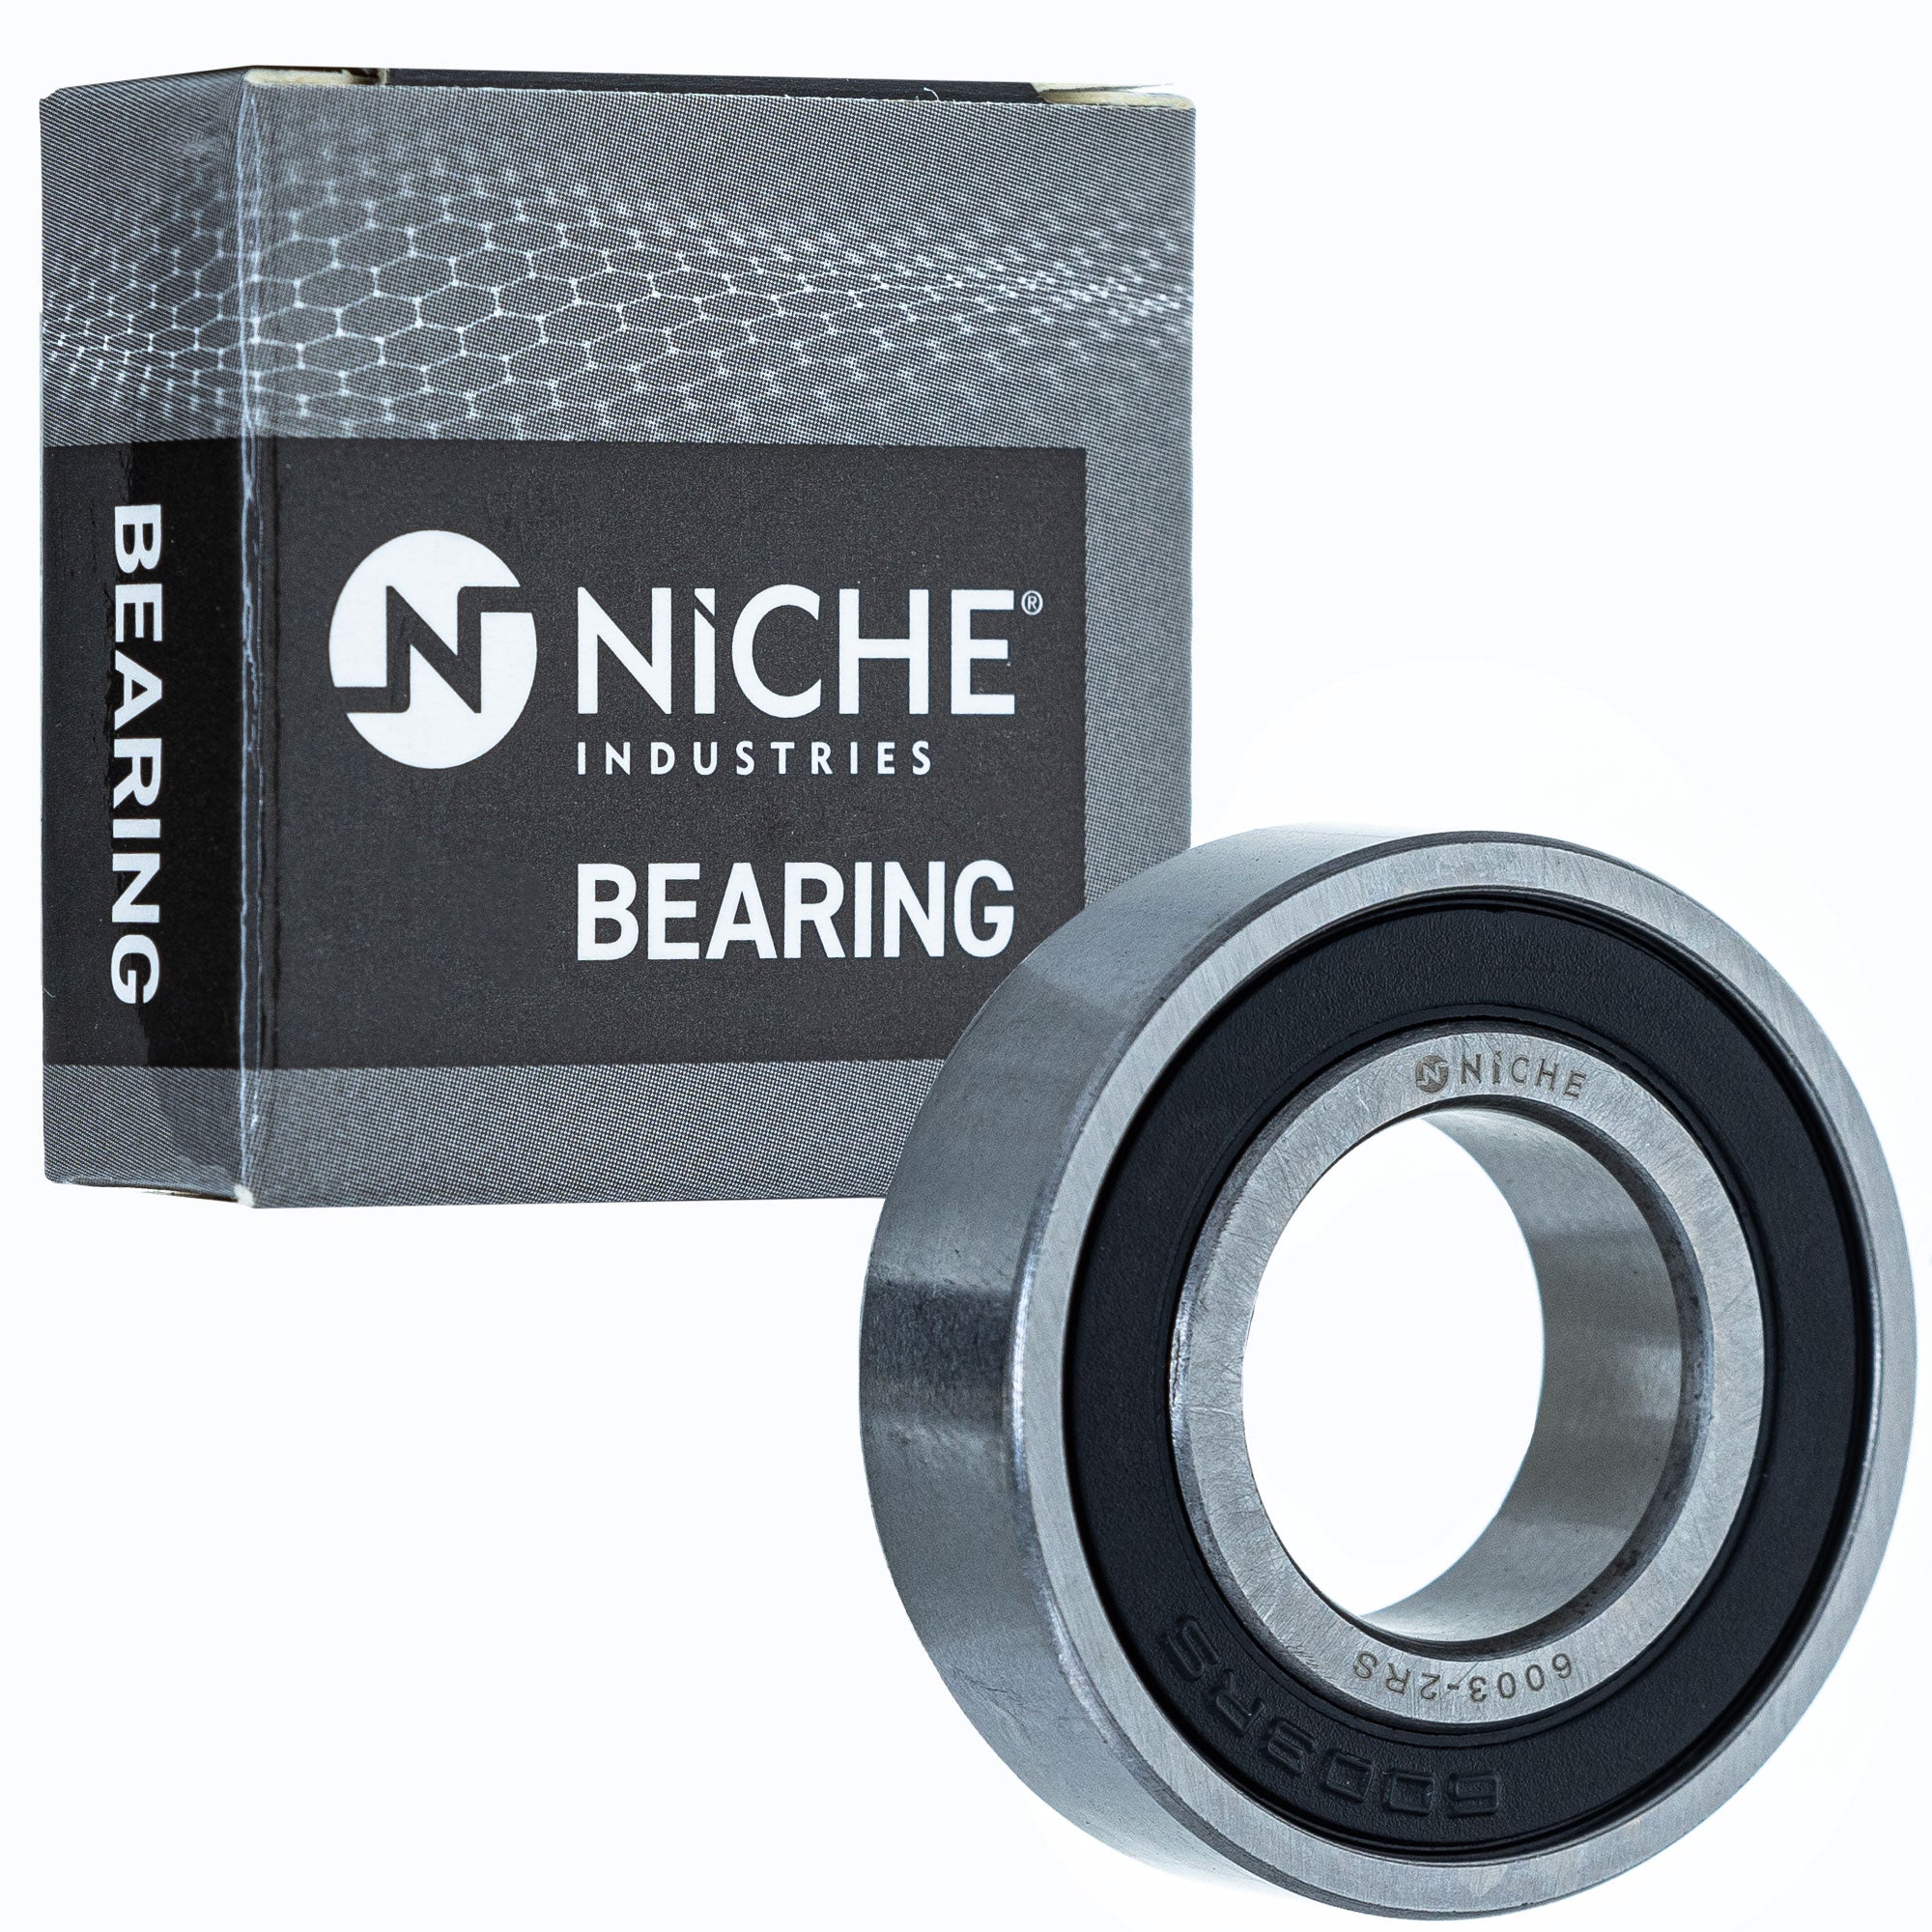 NICHE 519-CBB2238R Bearing 10-Pack for zOTHER Arctic Cat Textron